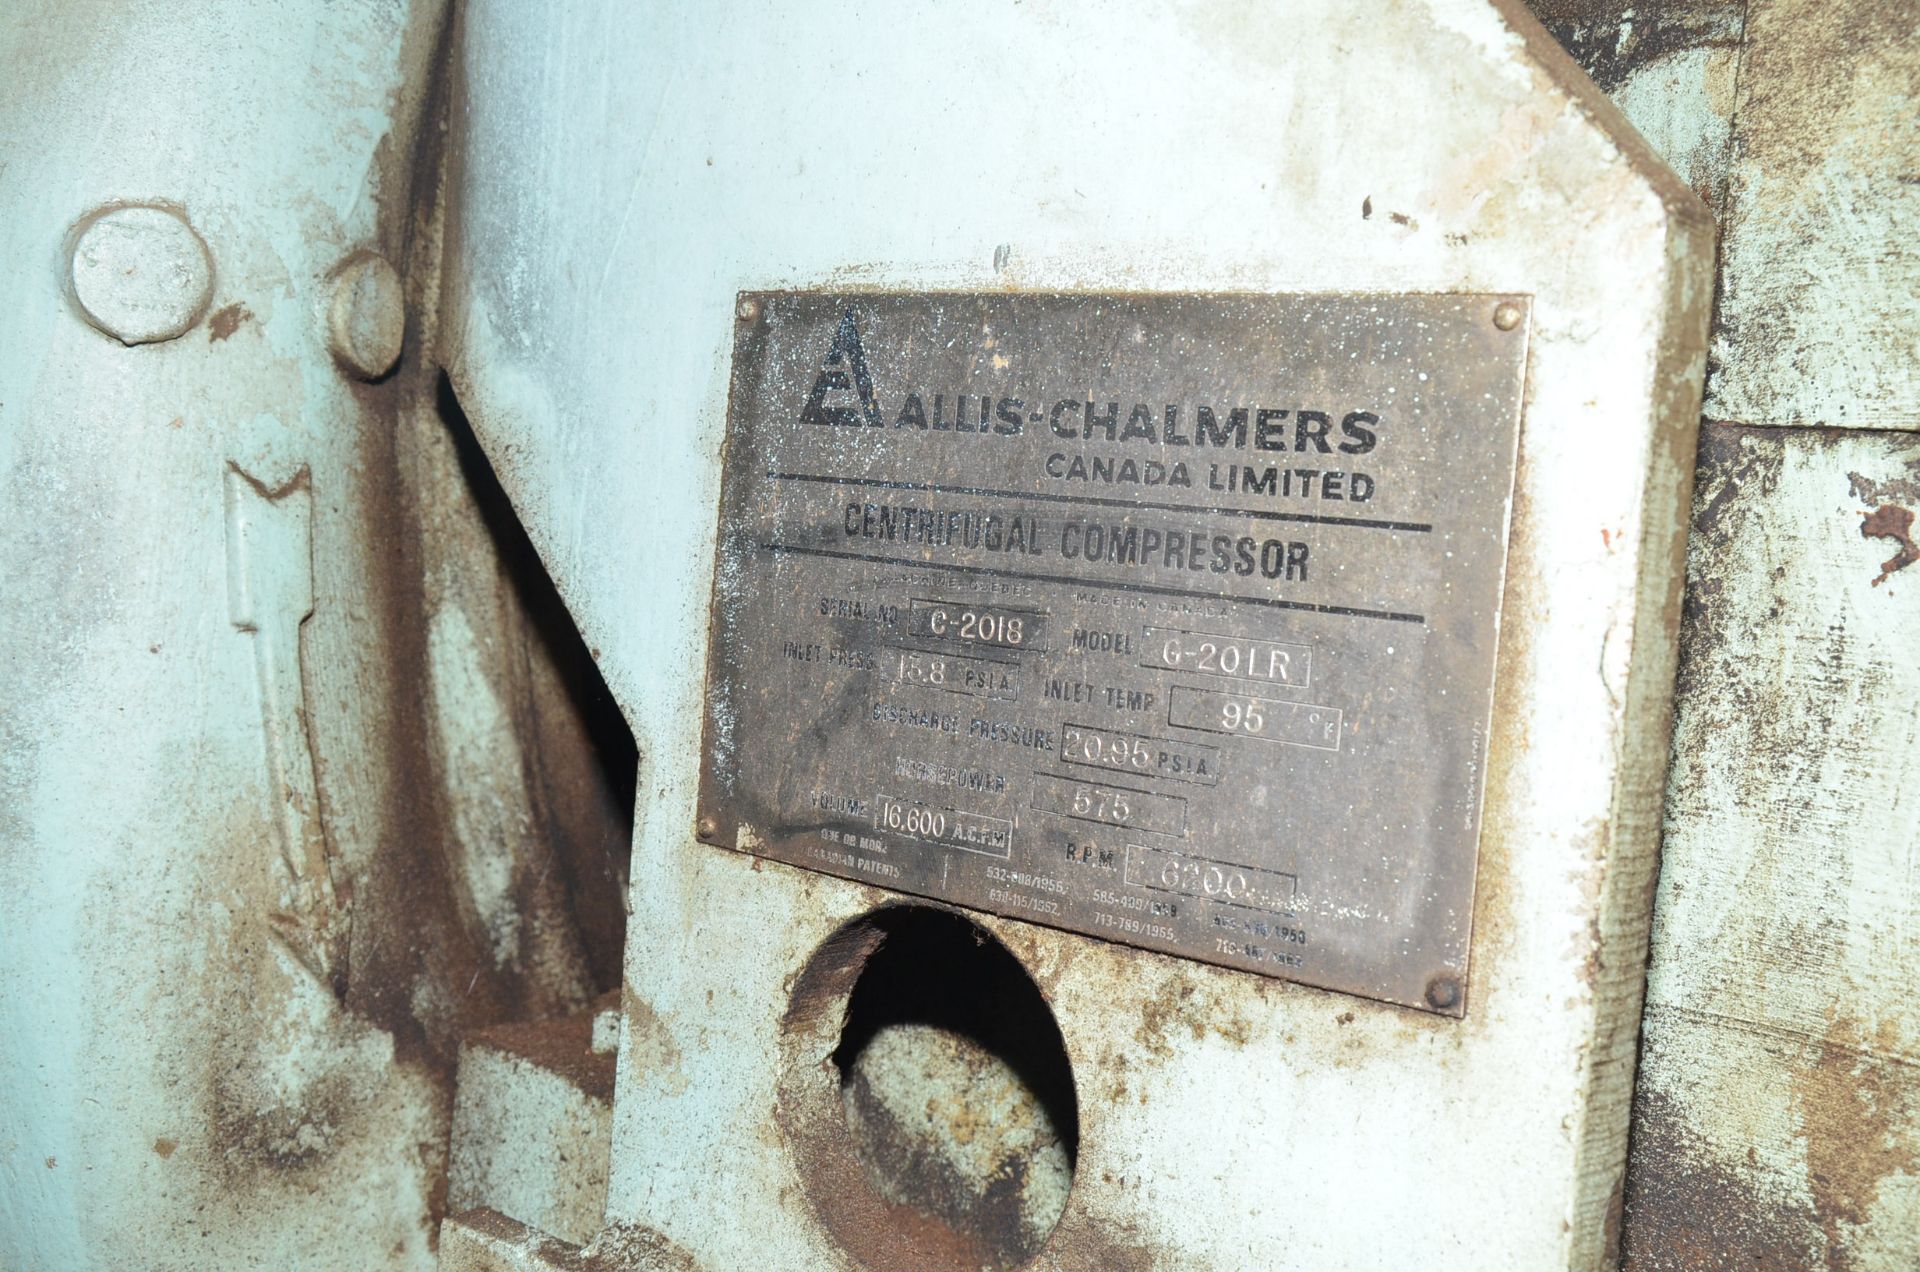 ALLIS-CHALMERS G-20LR 800HP ROTARY-TYPE CENTRIFUGAL COMPRESSOR WITH 16,600CFM@20.95PSI, S/N: C- - Image 6 of 6